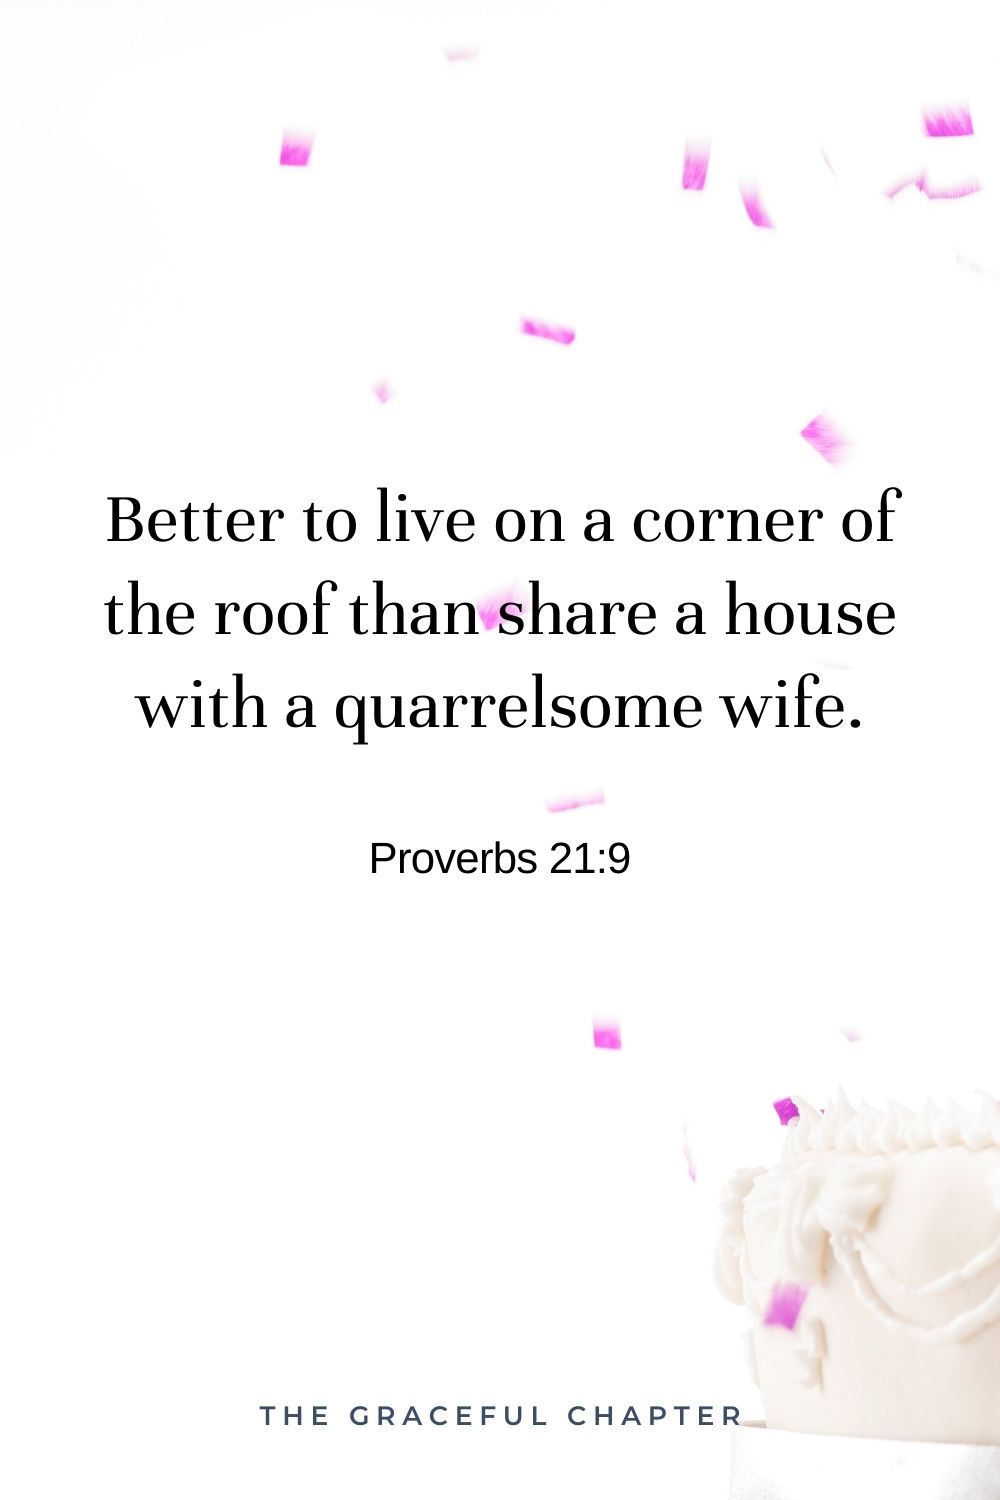 Better to live on a corner of the roof than share a house with a quarrelsome wife. Proverbs 21:9